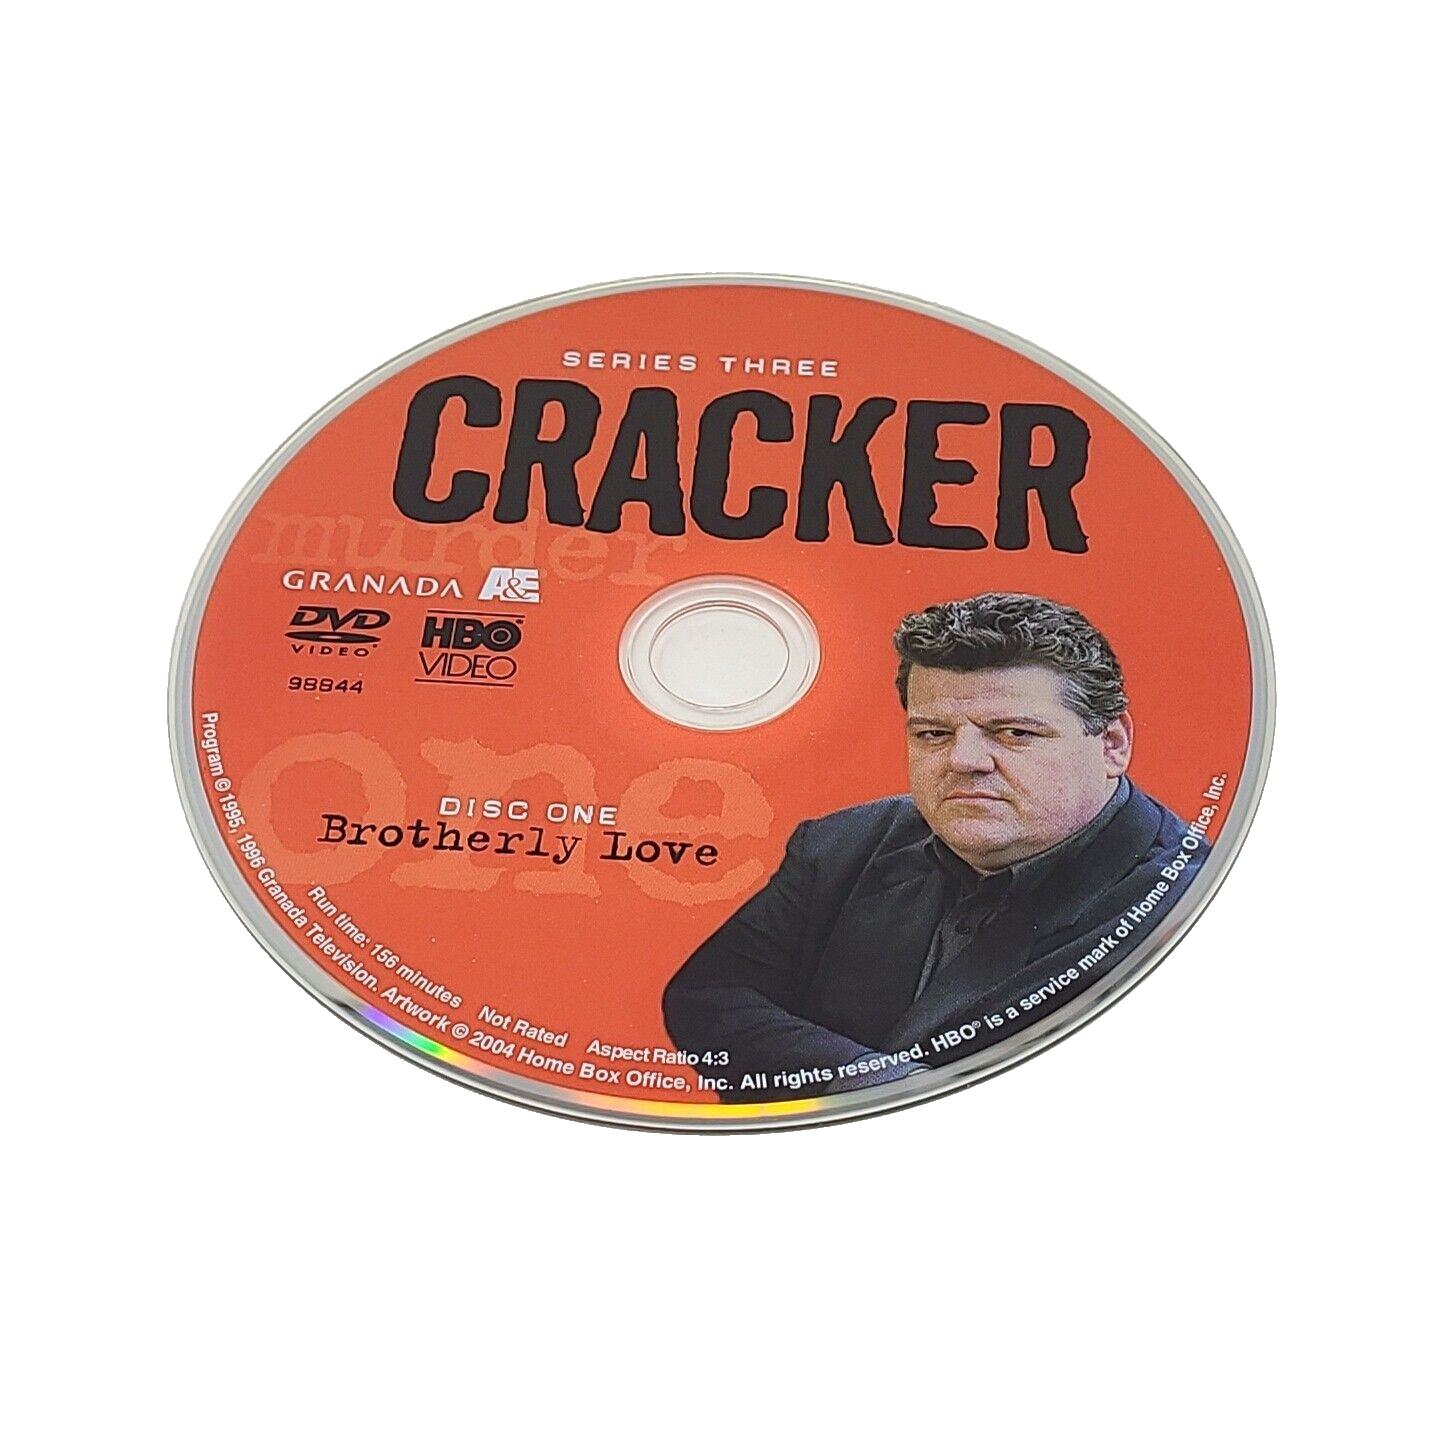 Primary image for Cracker Season 3 Three DVD Replacement Disc 1 HBO Show